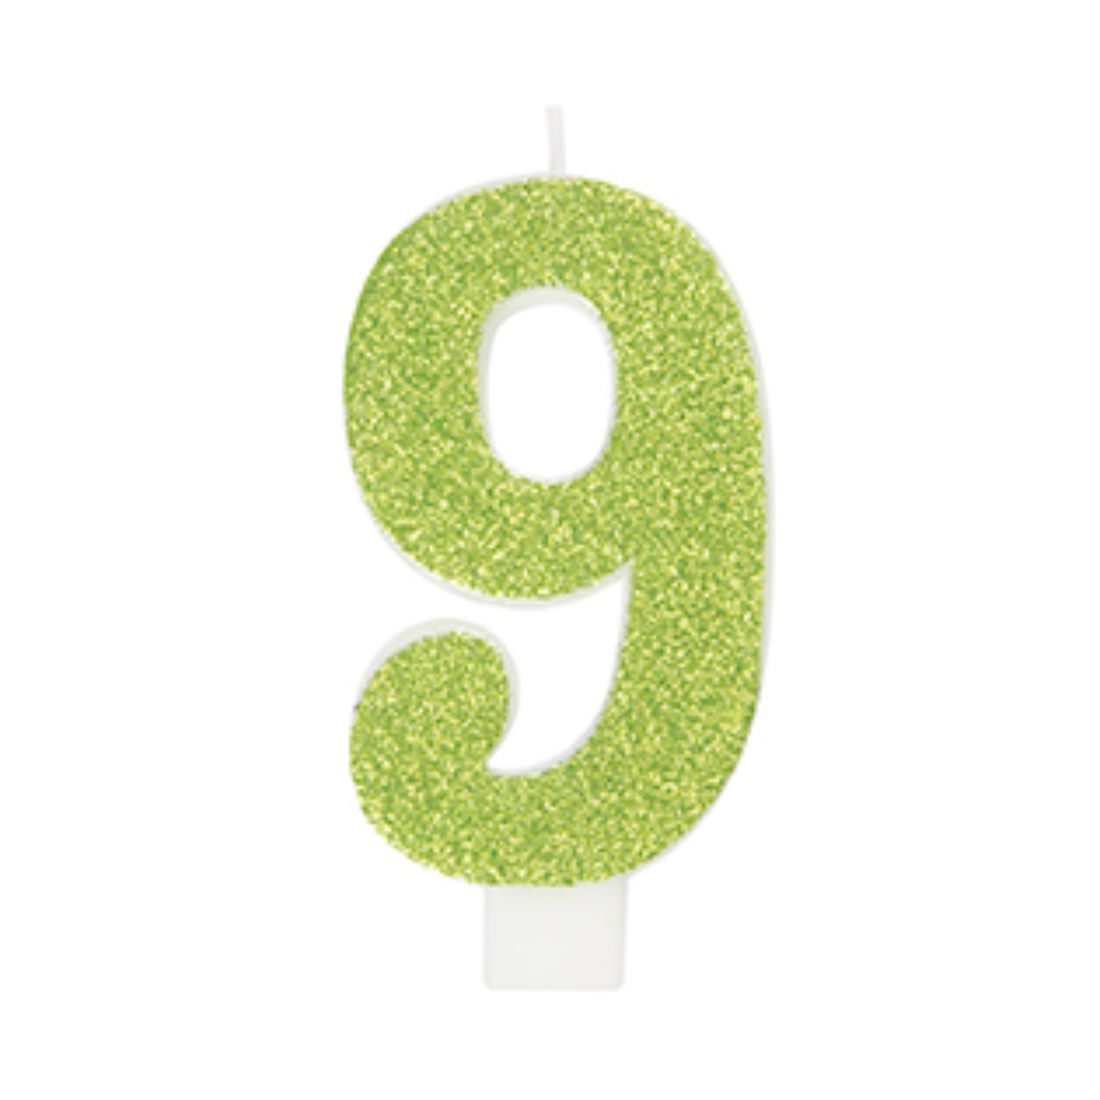 Unique Number 9 Glitter One Side Printed Candle